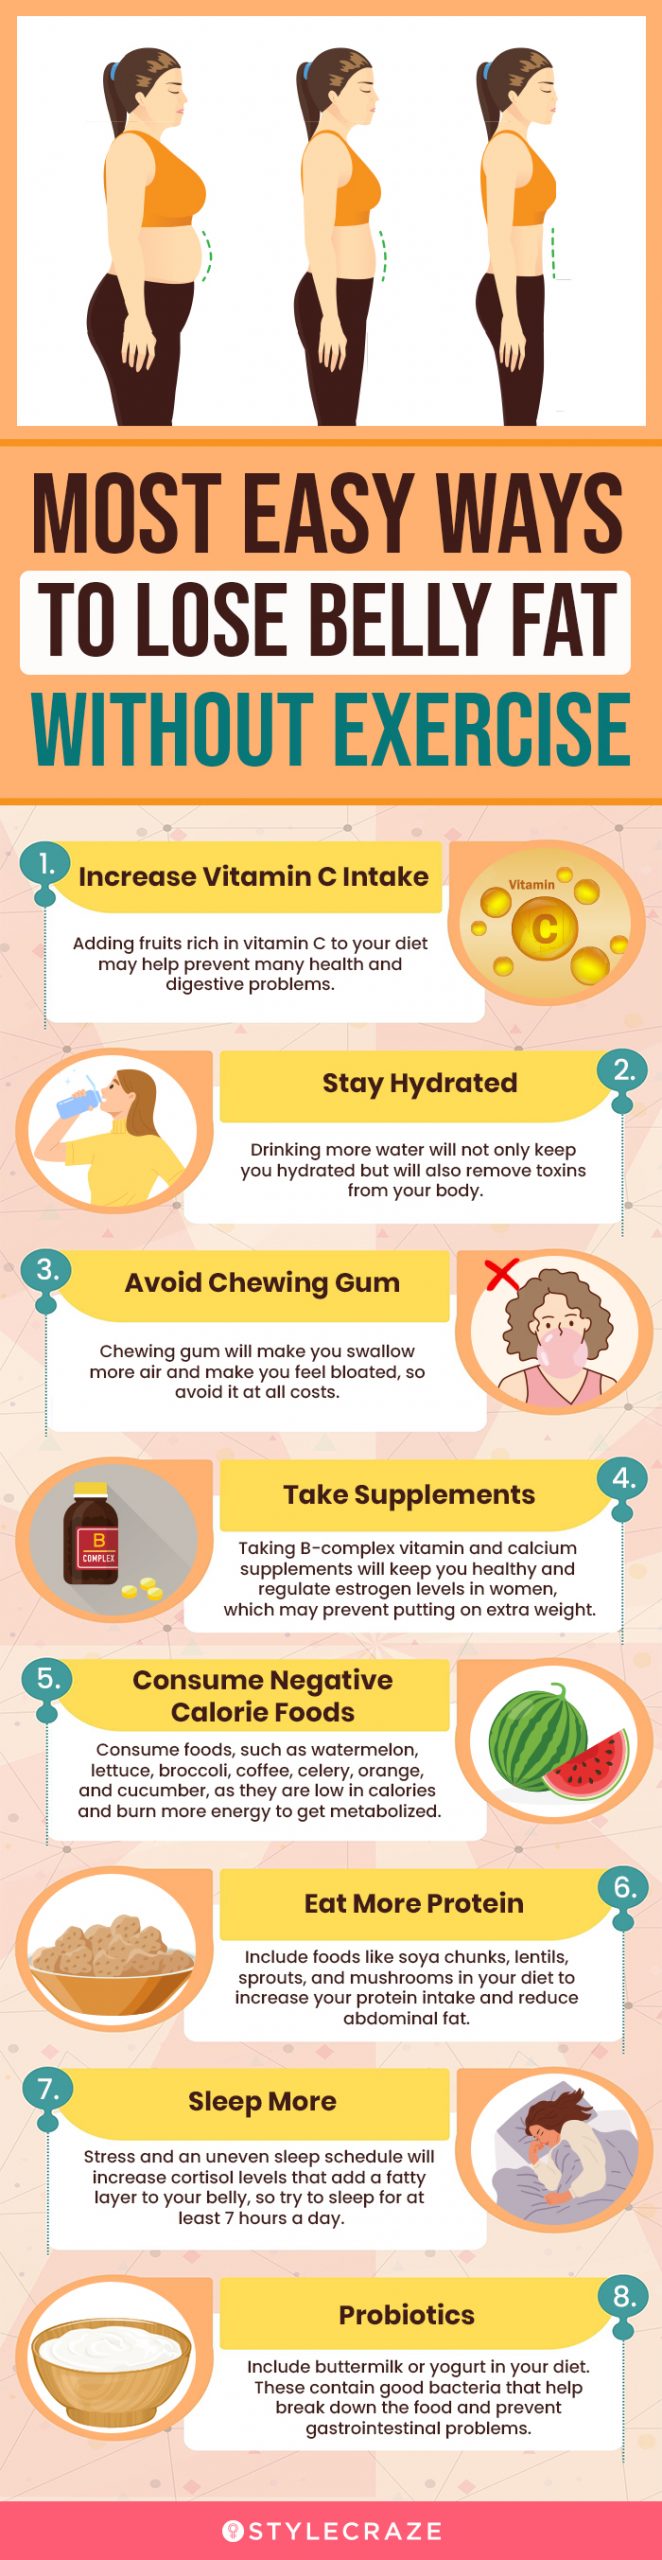 most easy ways to lose belly fat without excercise (infographic)